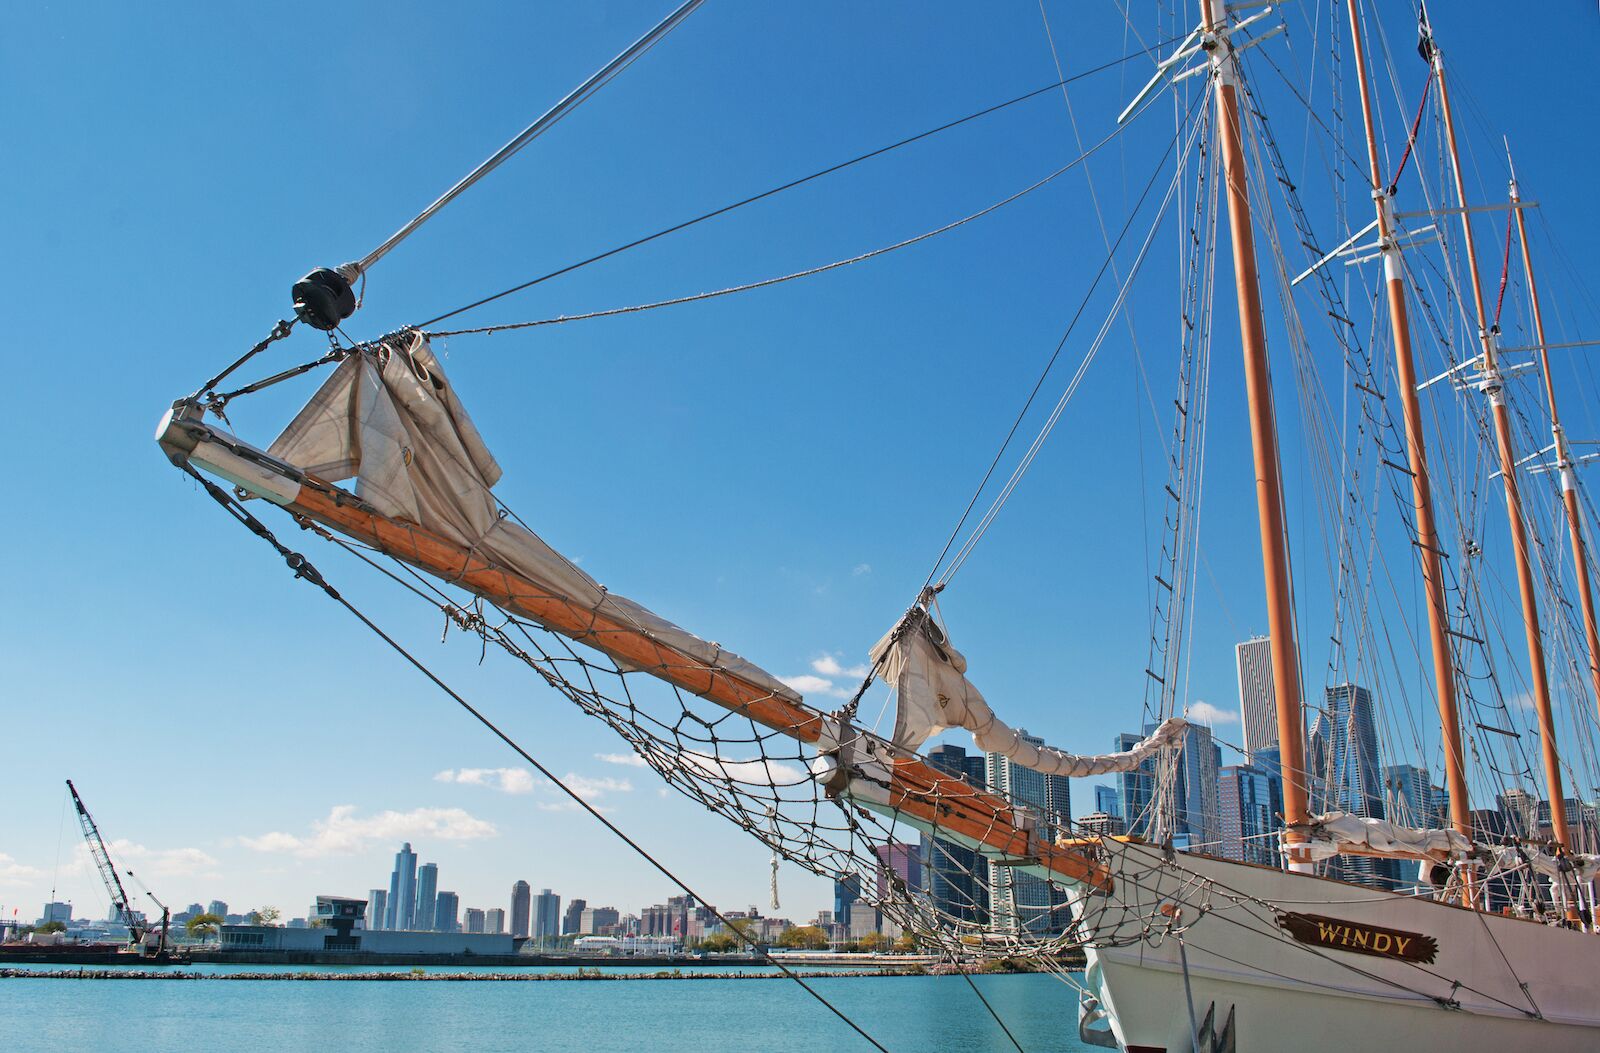 Tall Ship Windy is one of the best things to do in Chicago